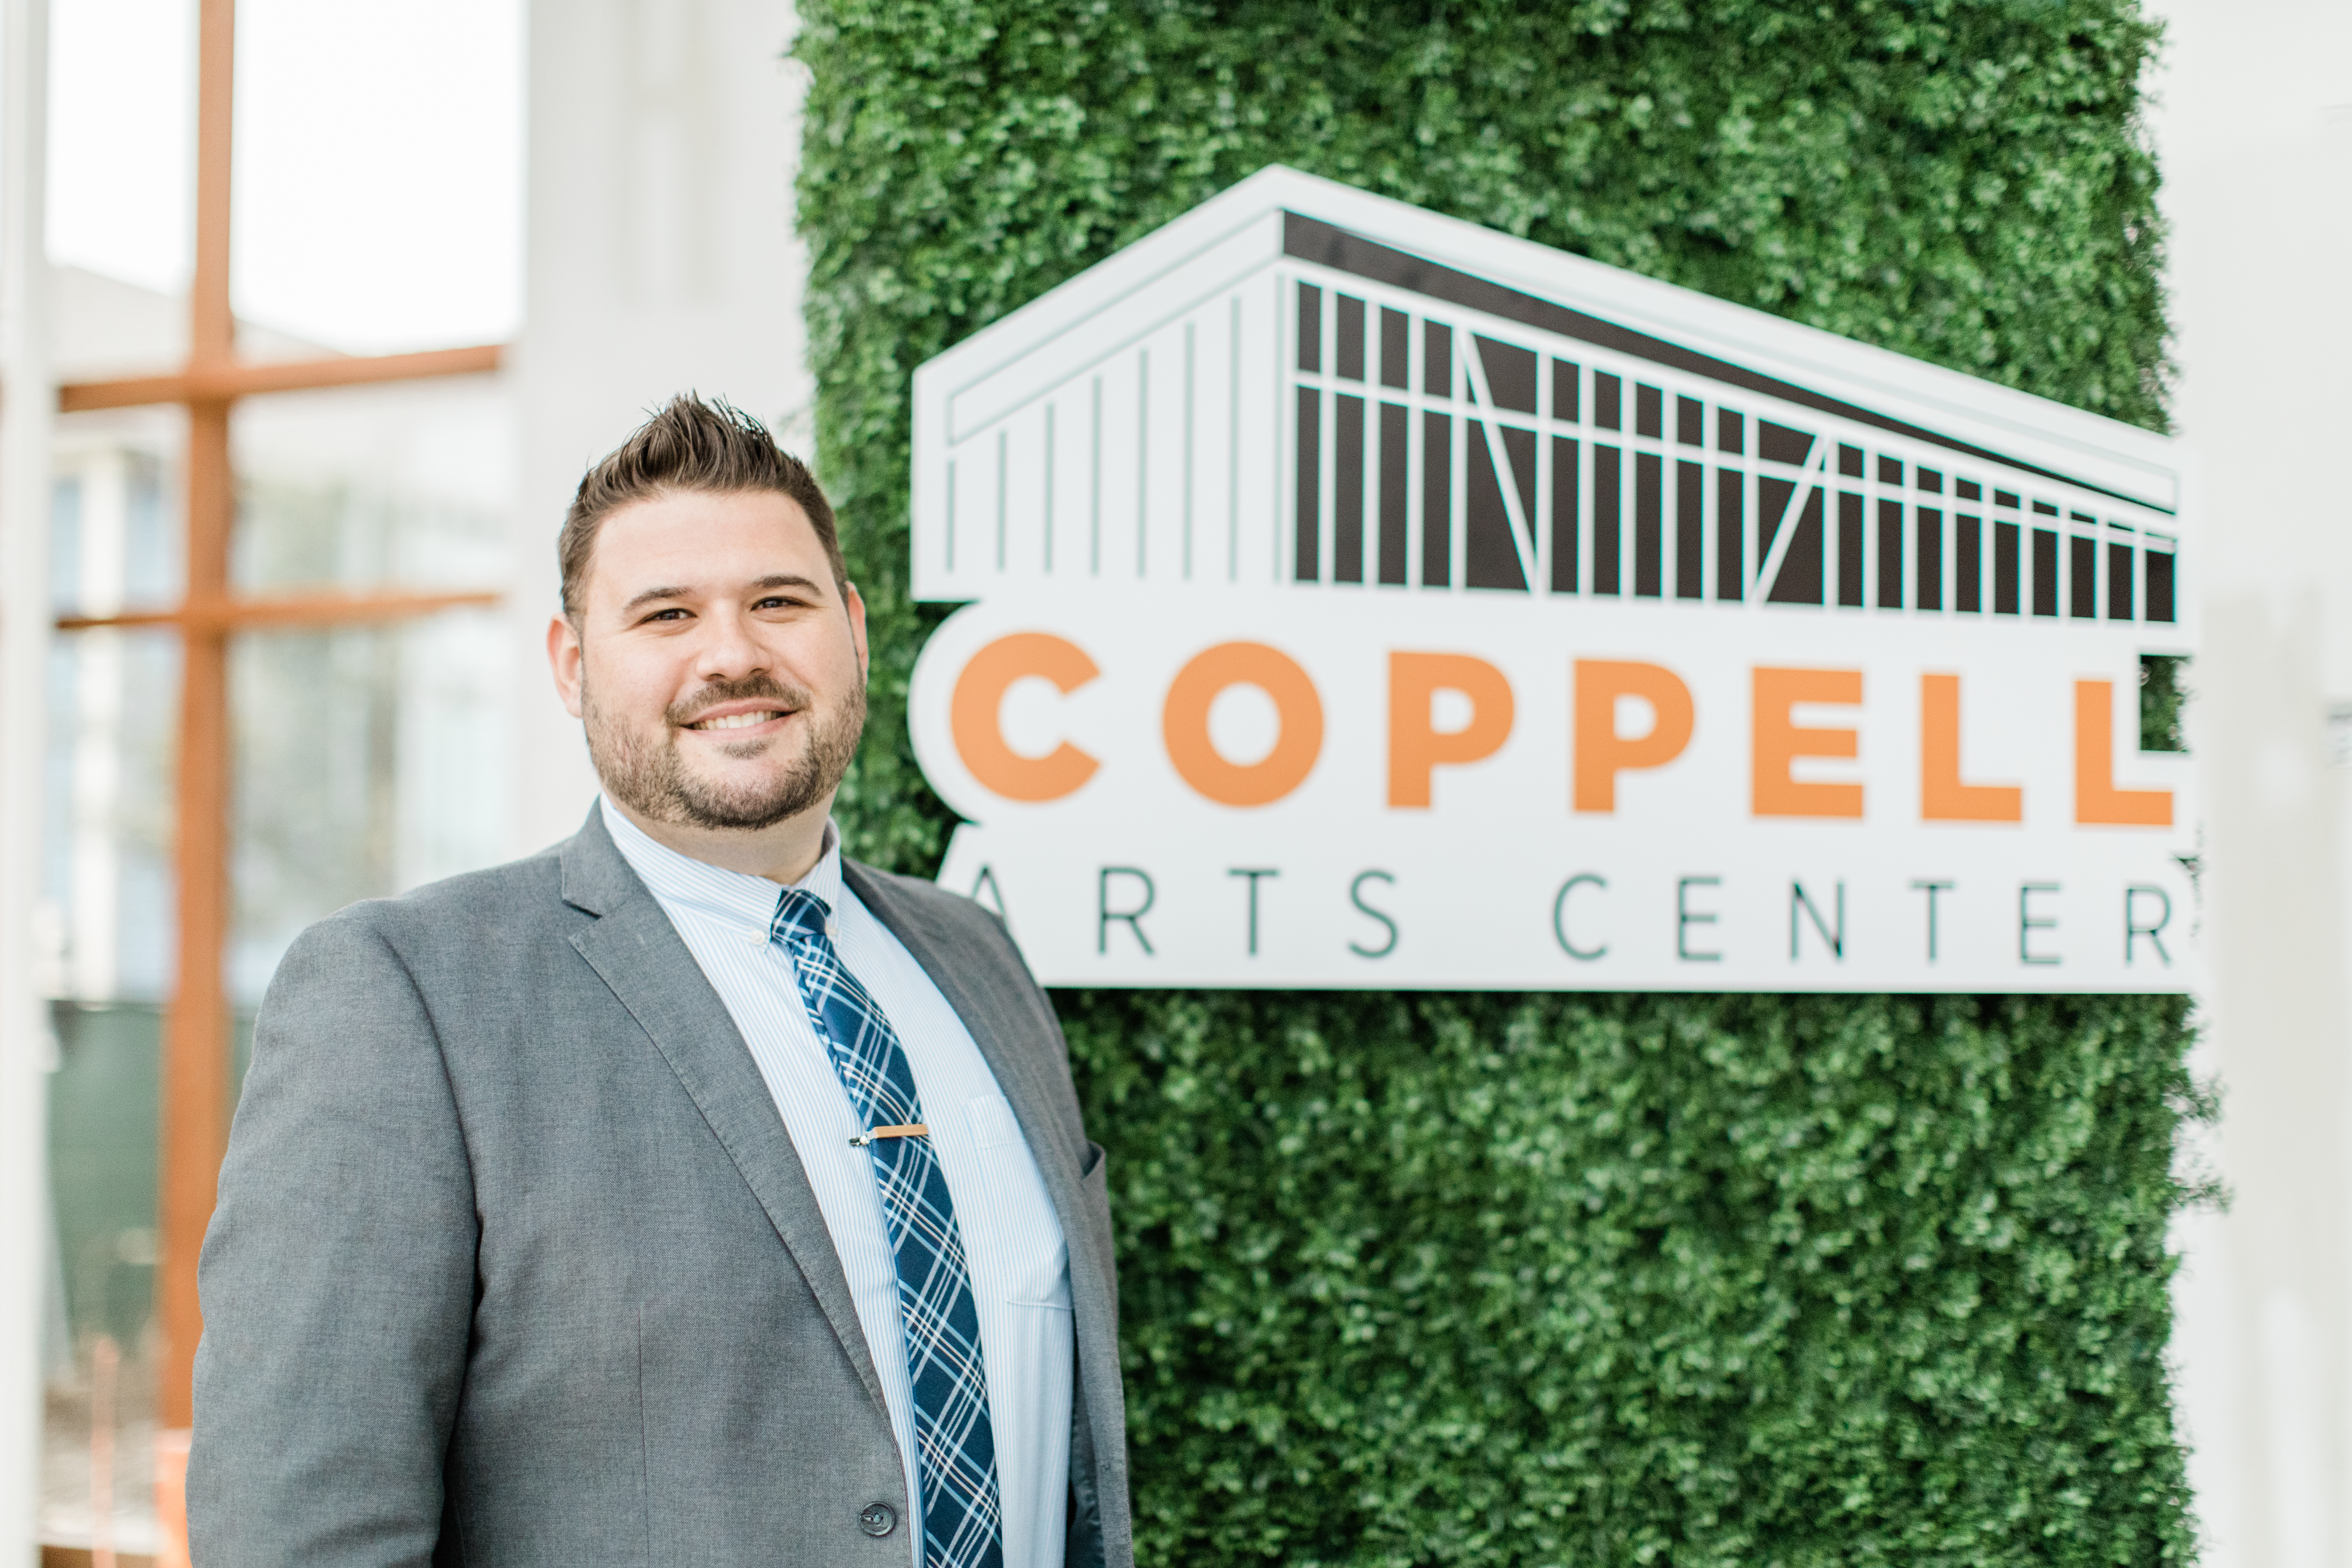 Alex Hargis standing in front of the Coppell Arts Center logo.